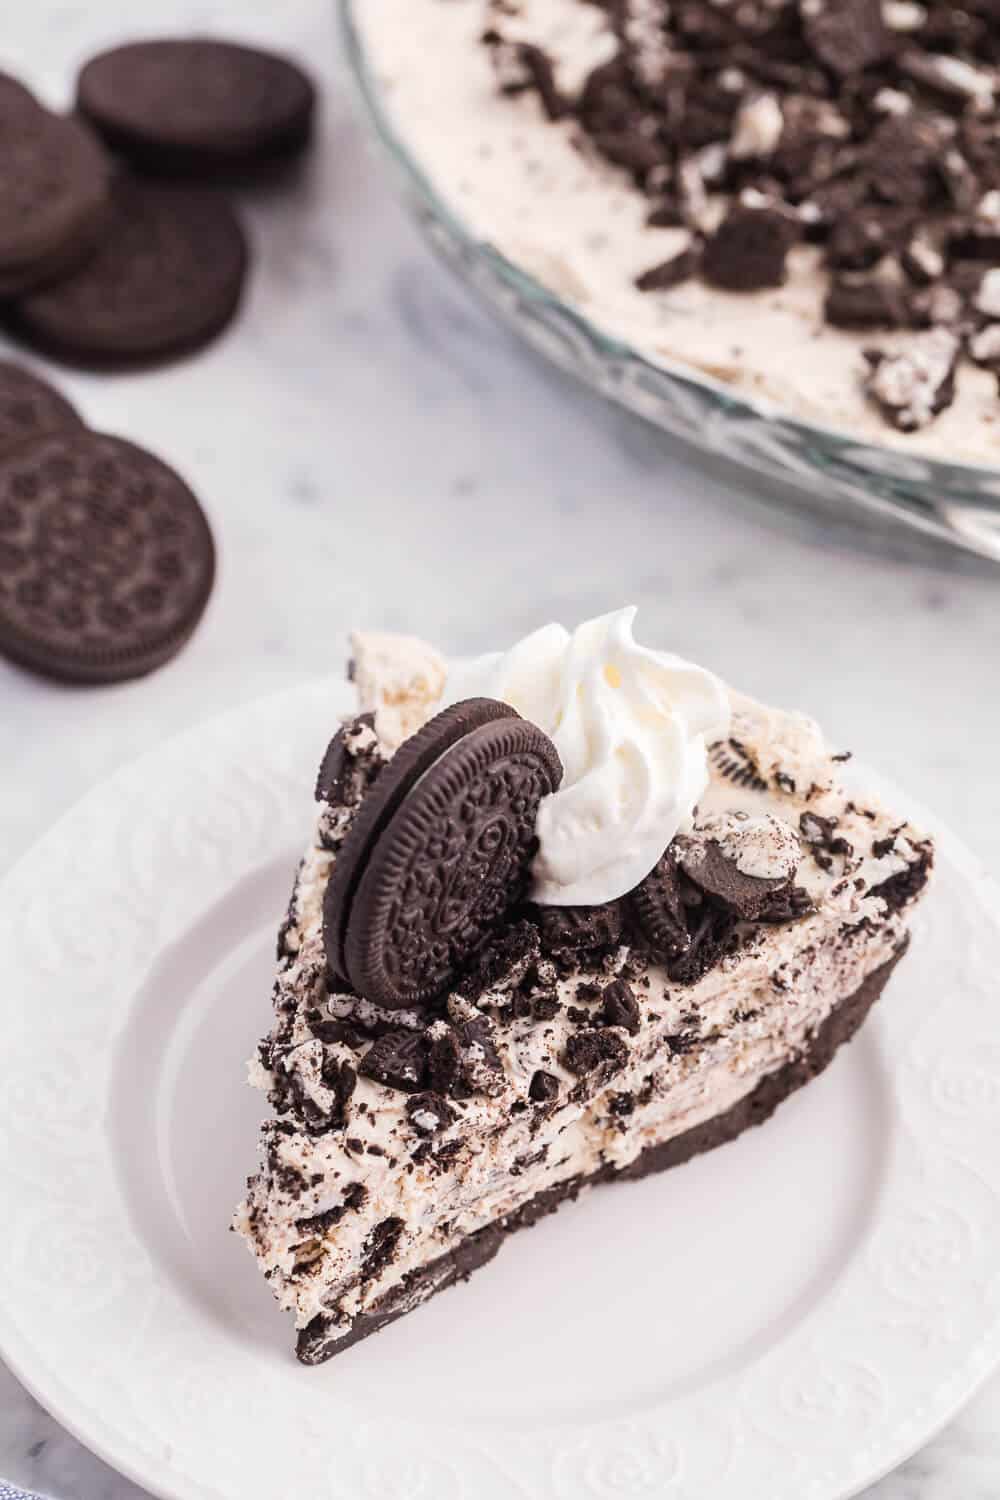 Oreo Pie Recipe - This easy no-bake pie recipe has a chocolate Oreo crust and creamy sweet filling made with Cool Whip, Oreos and cream cheese. You'll love the cookies and cream taste in very bite!